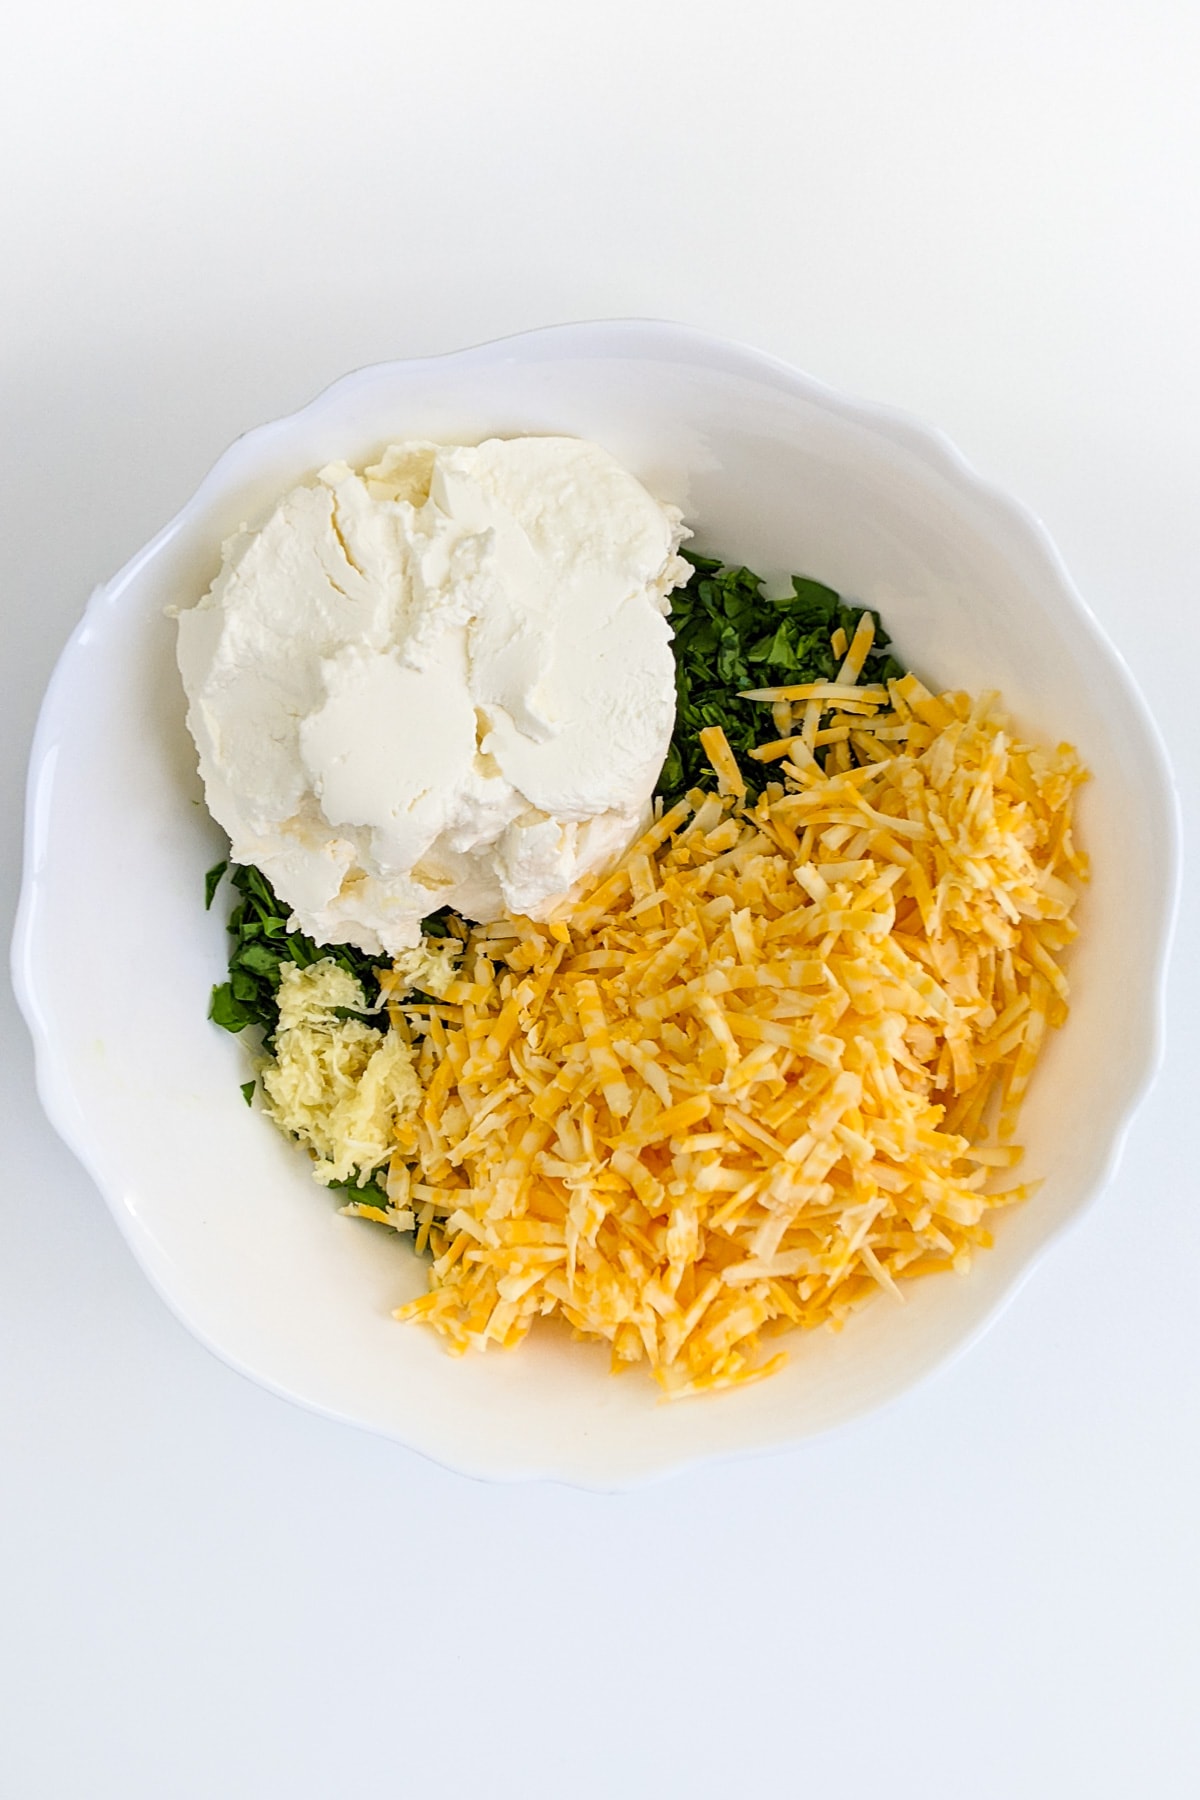 Top view of a white bowl with chopped parsley, cream cheese and cheddar.